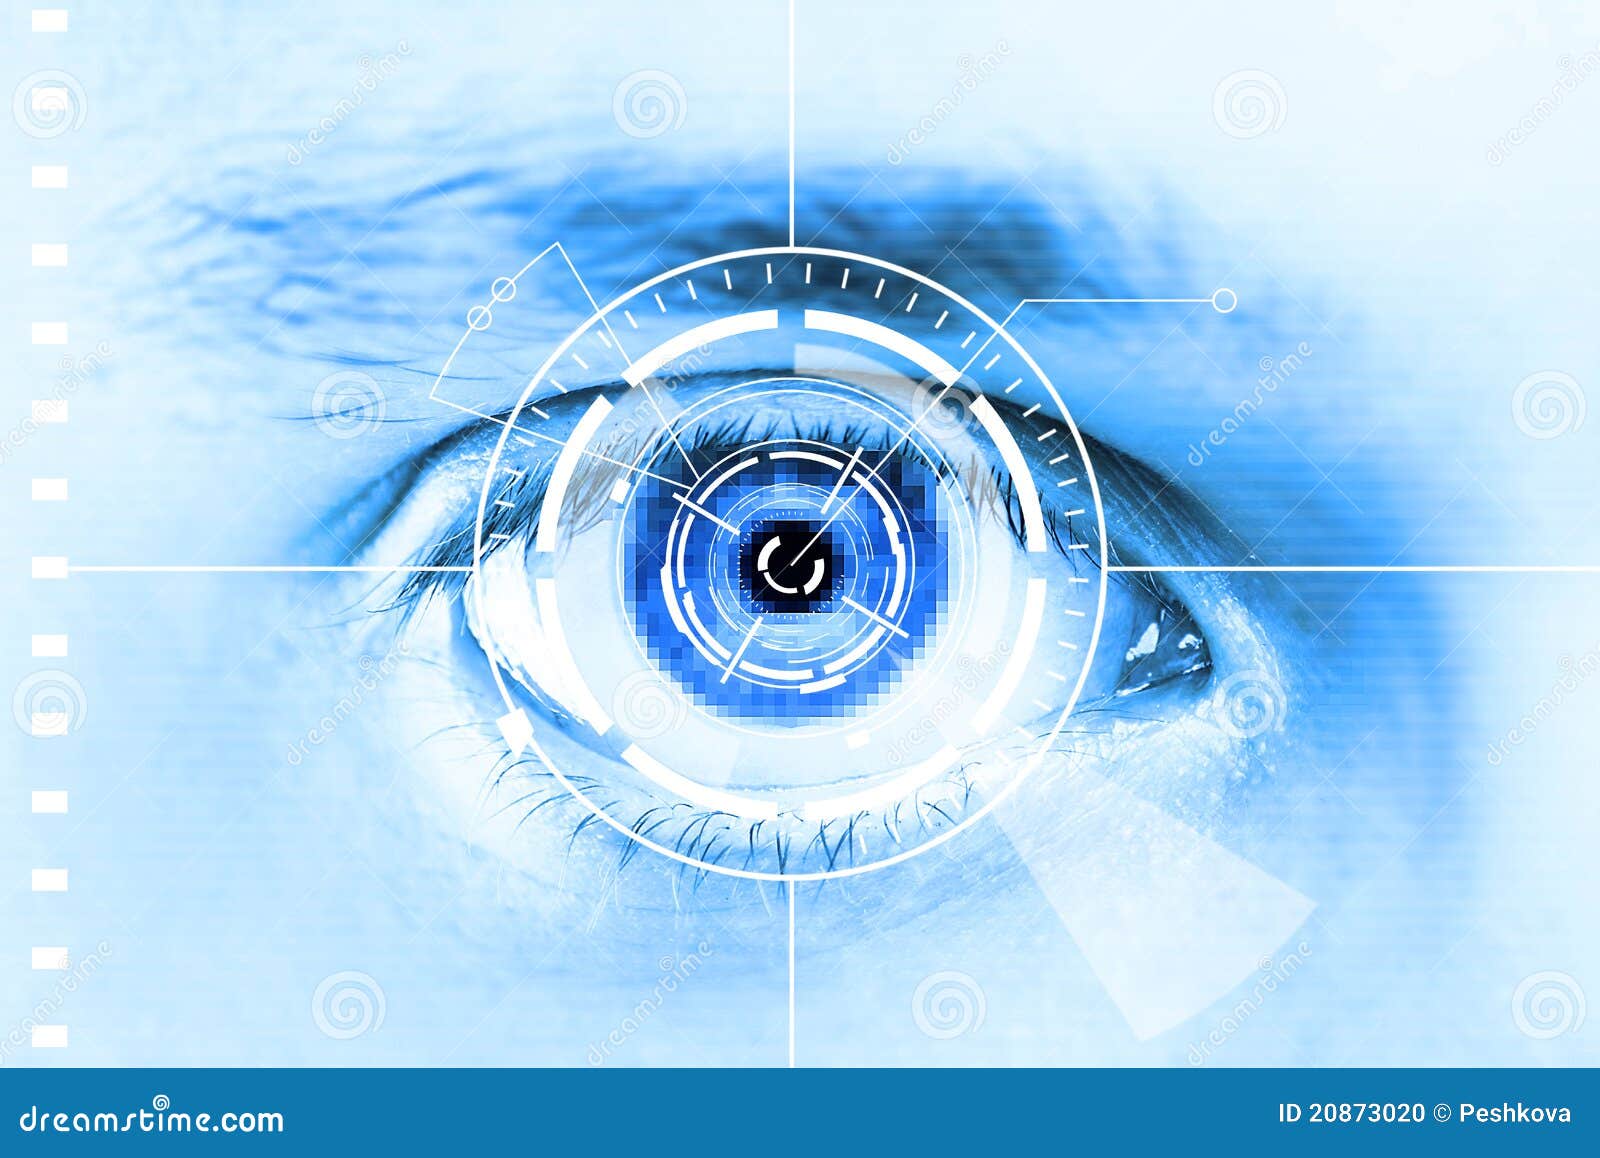 Technology Scan Eye For Security Or Identification Stock ...